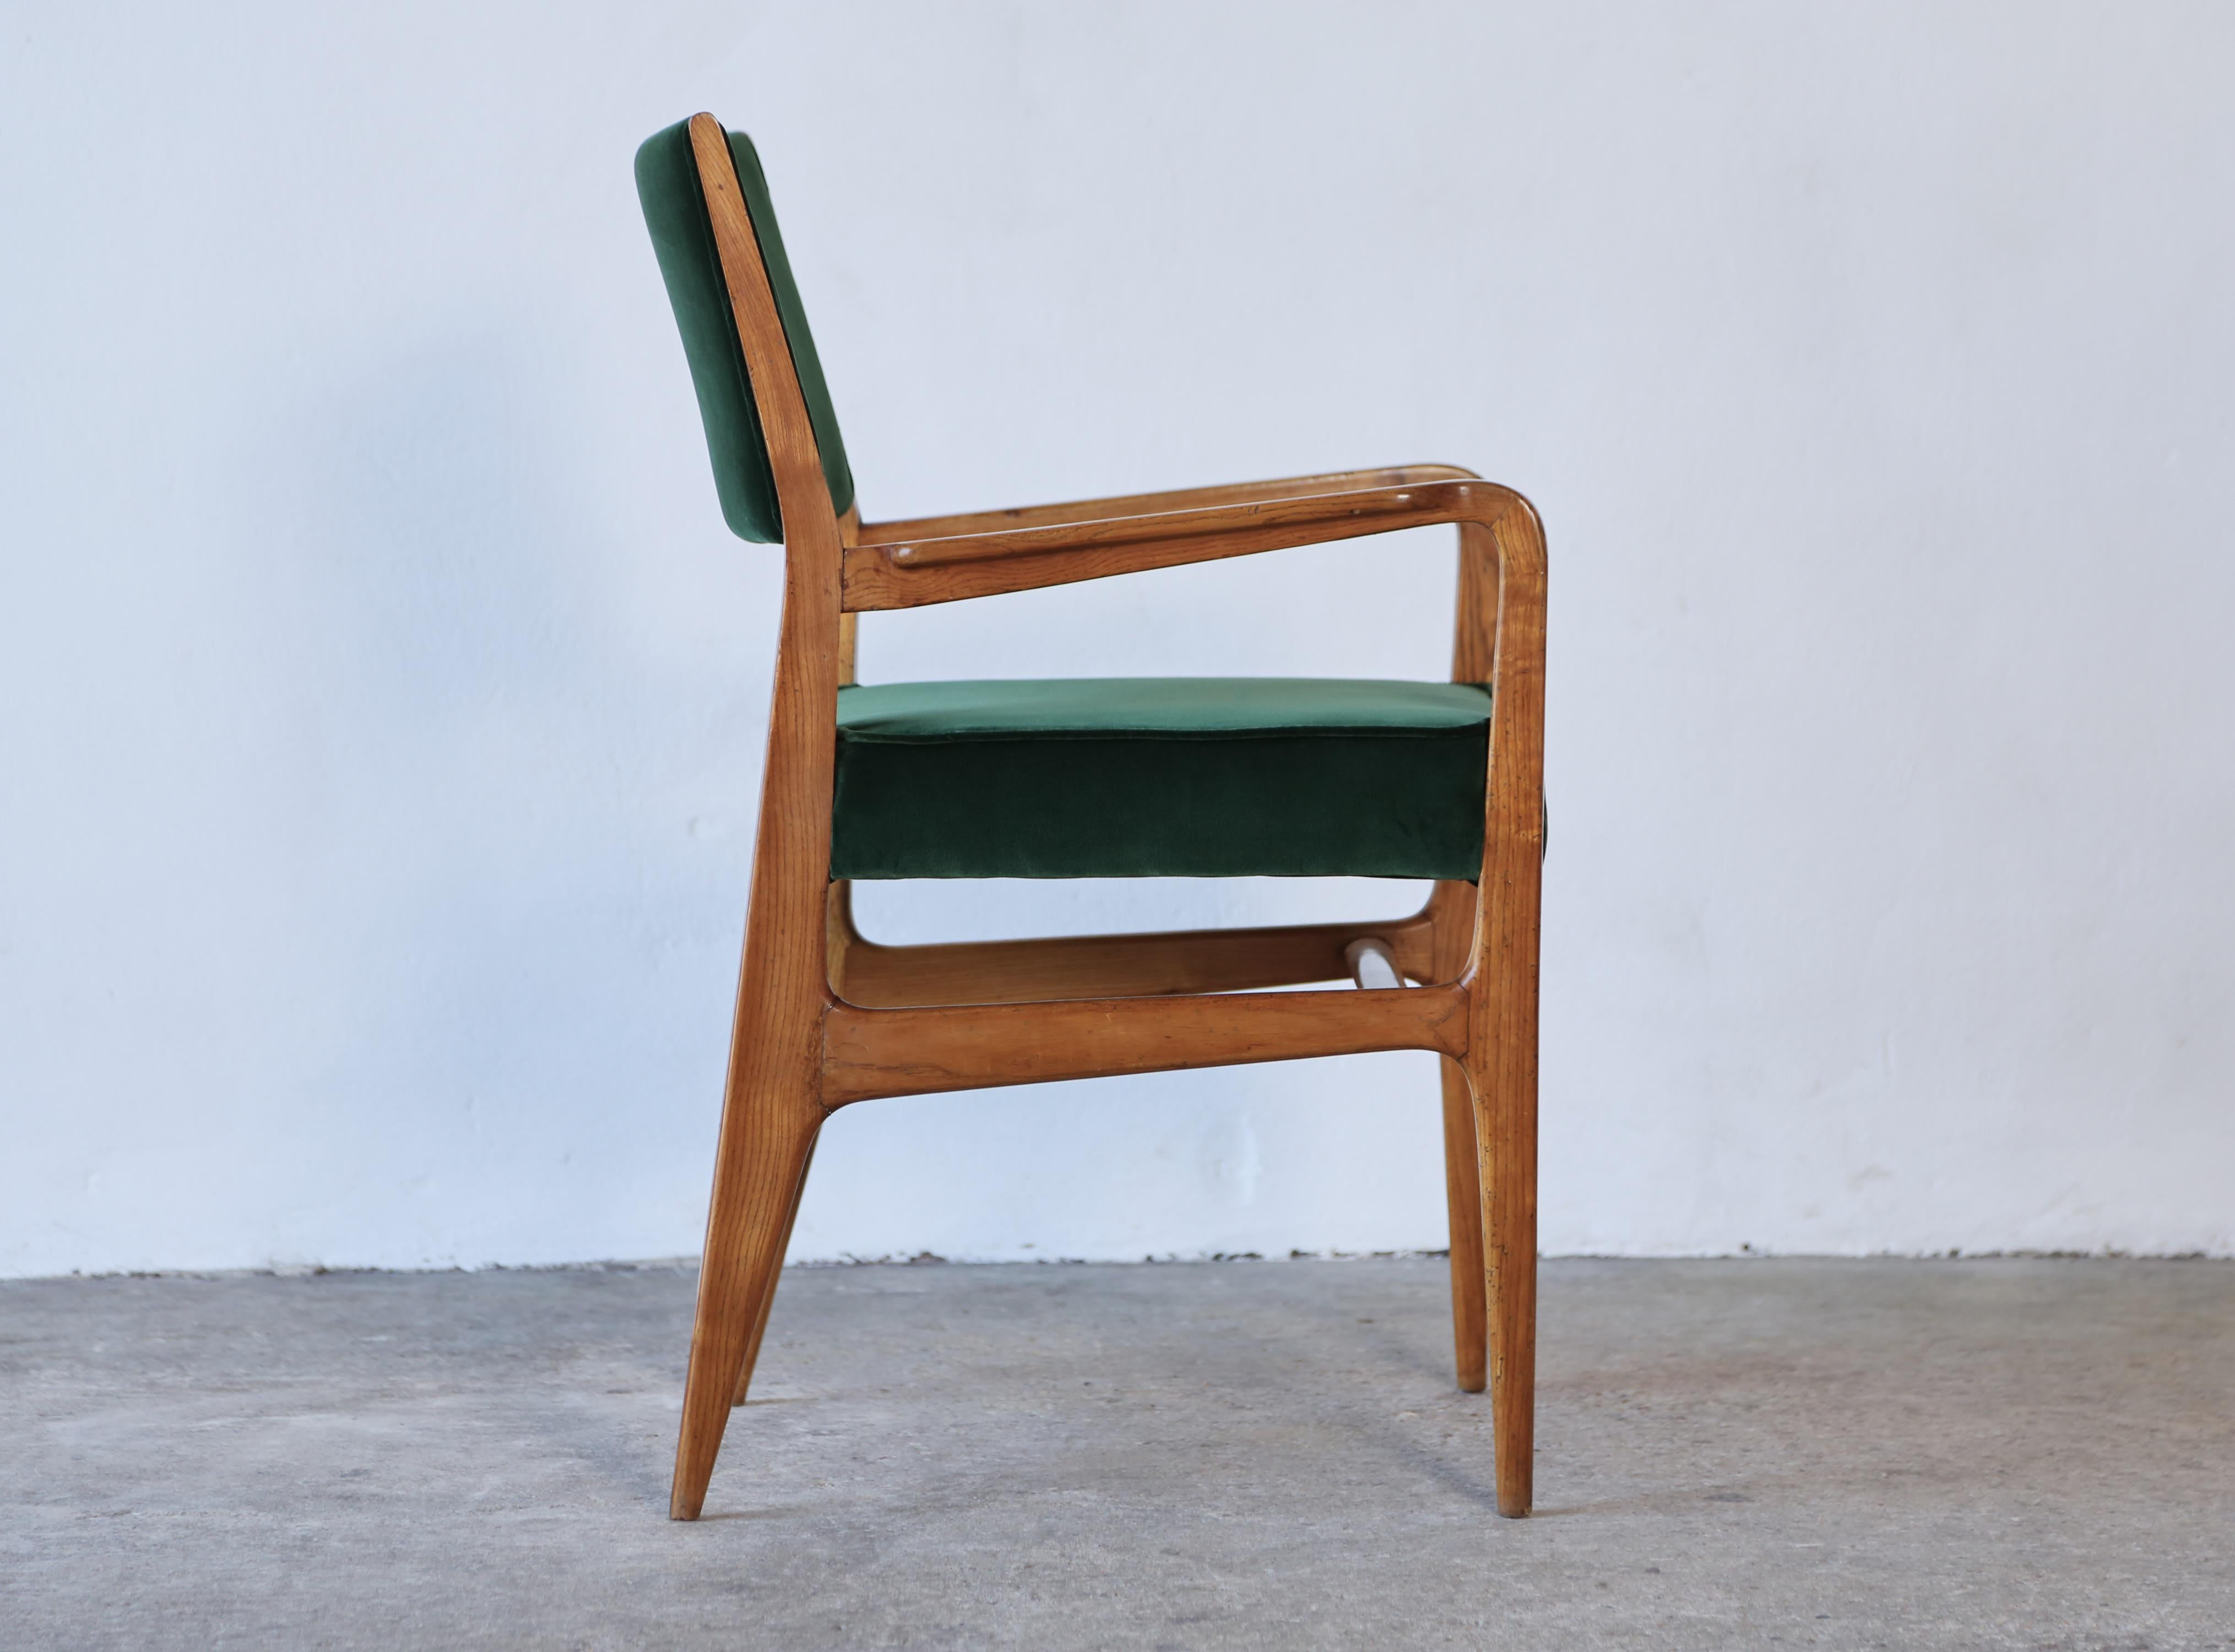 Rare Early Gio Ponti Chair, Giordano Chiesa, Italy, 1950s For Sale 6